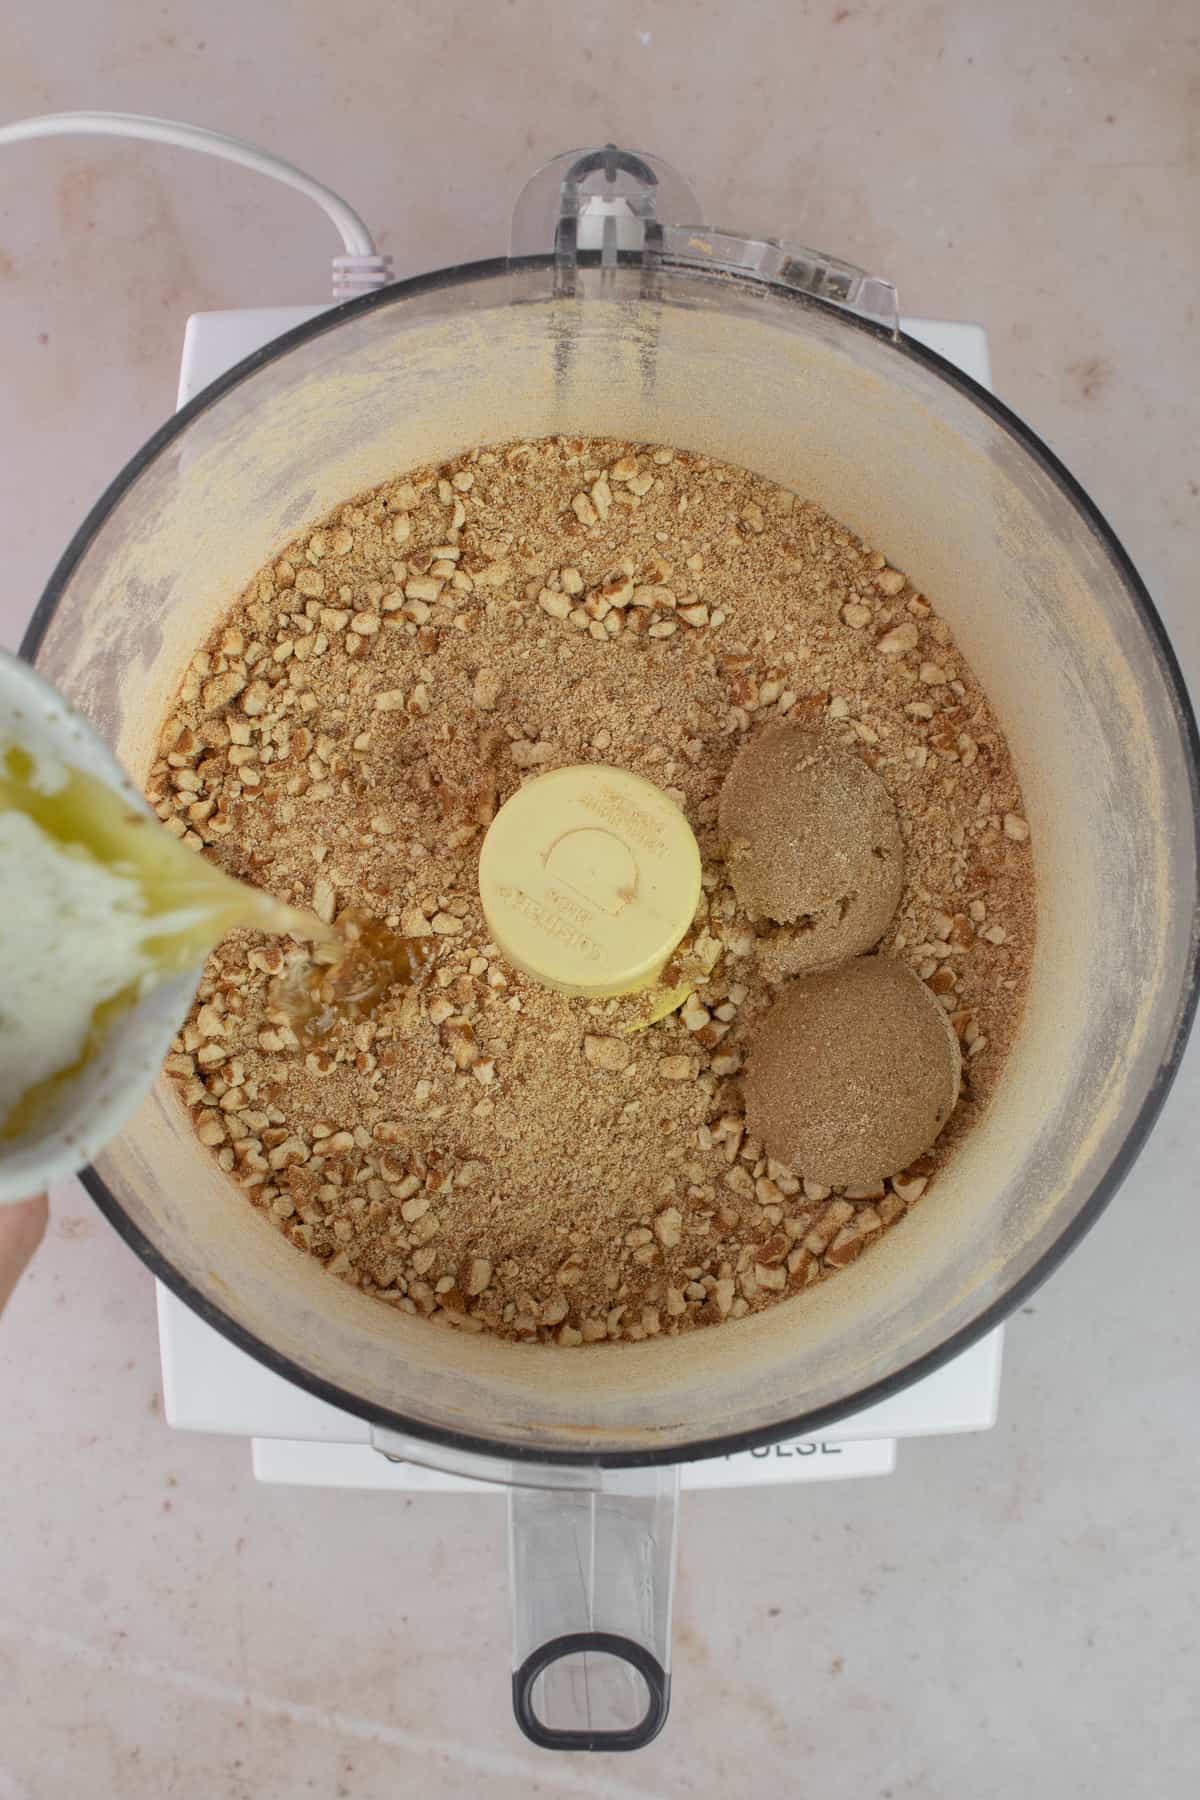 Food processor with crust pretzel crumbs, brown sugar and melted butter is being drizzled in